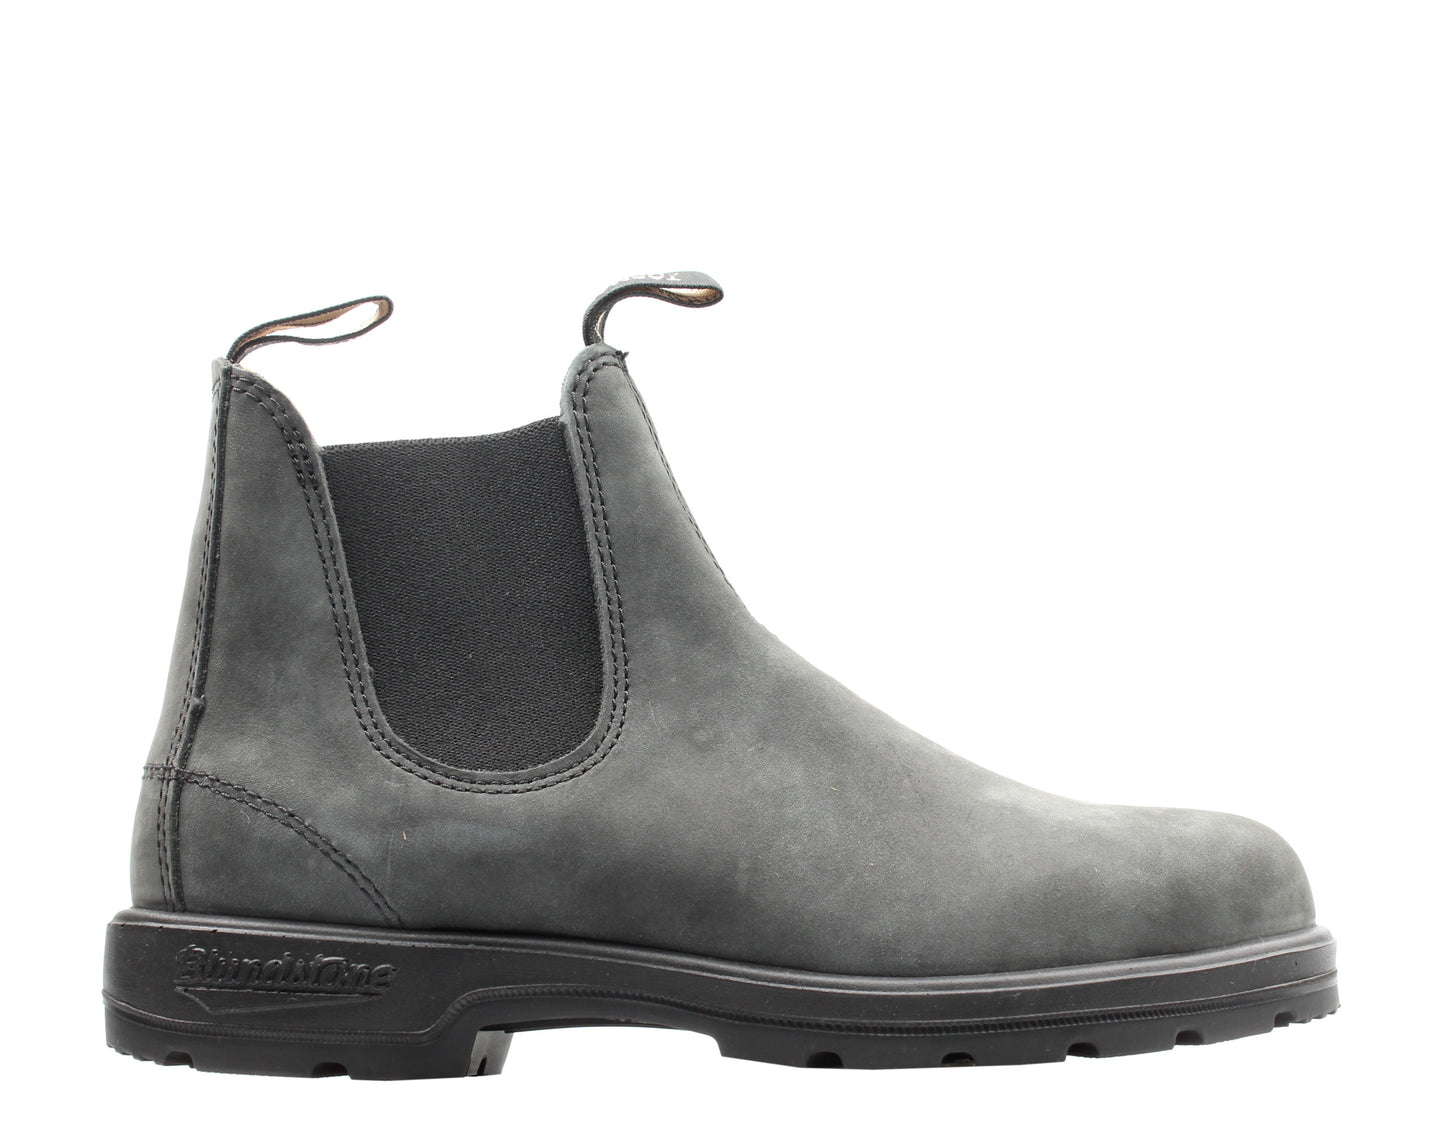 Blundstone 587 Classic Chelsea Boots